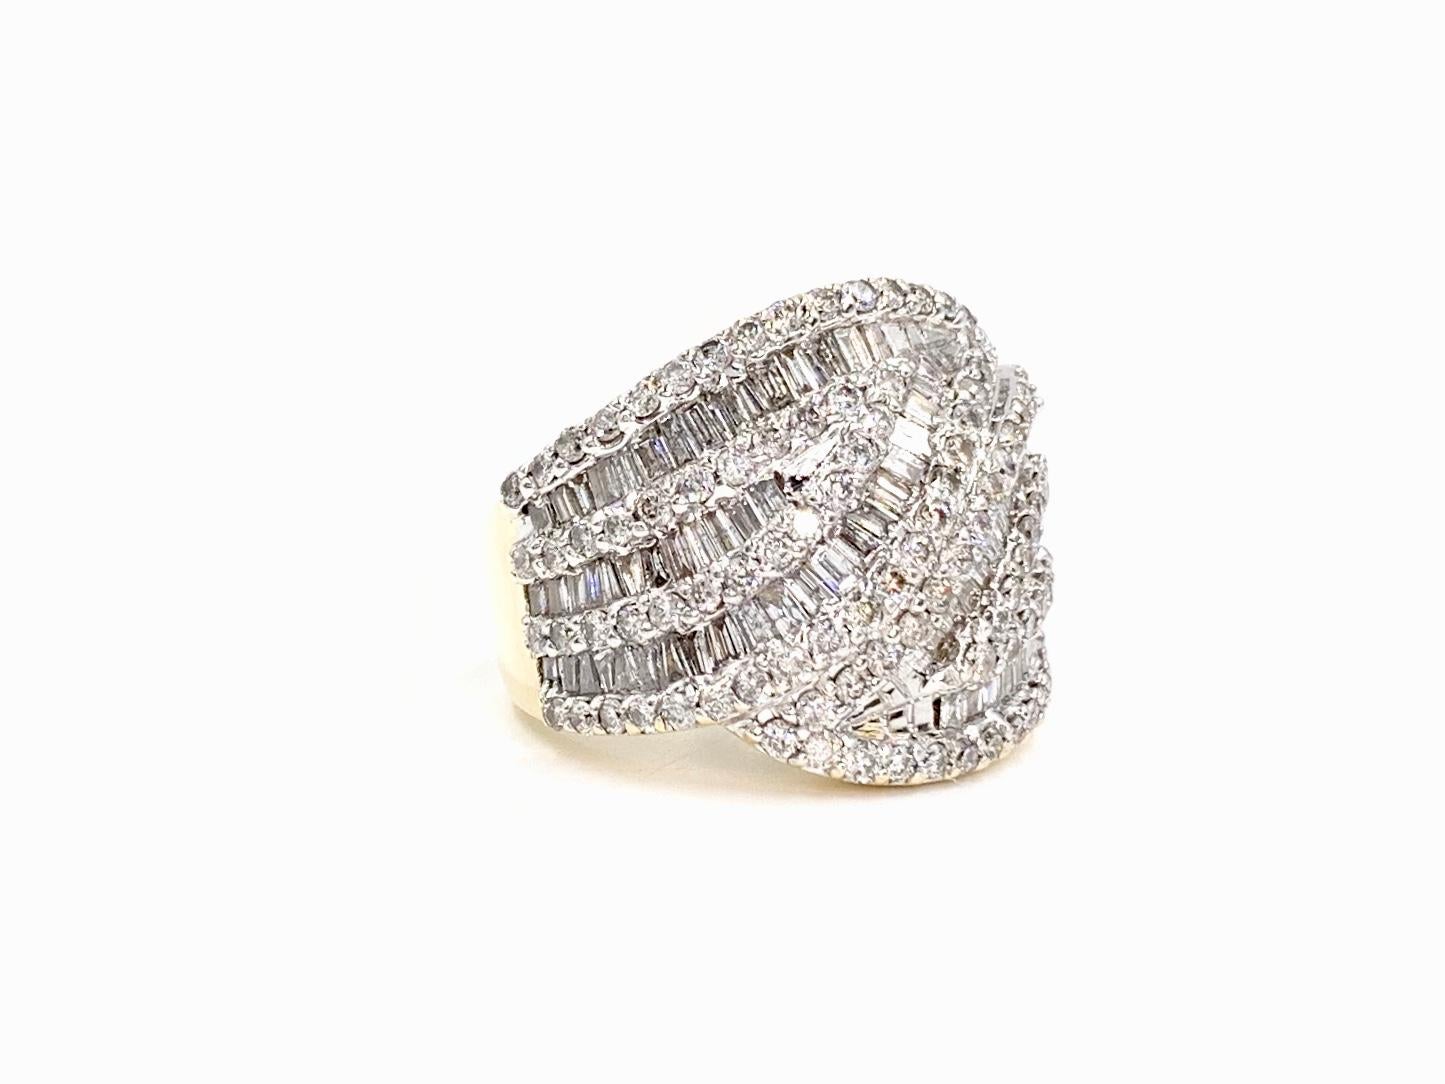 Two sparkling large diamond leafs connect in a bypass-illusion design wide 14 karat gold ring featuring approximately 3 carats of baguette and round brilliant diamonds. Diamond quality is approximately H color, I1 clarity. Diamonds are set with